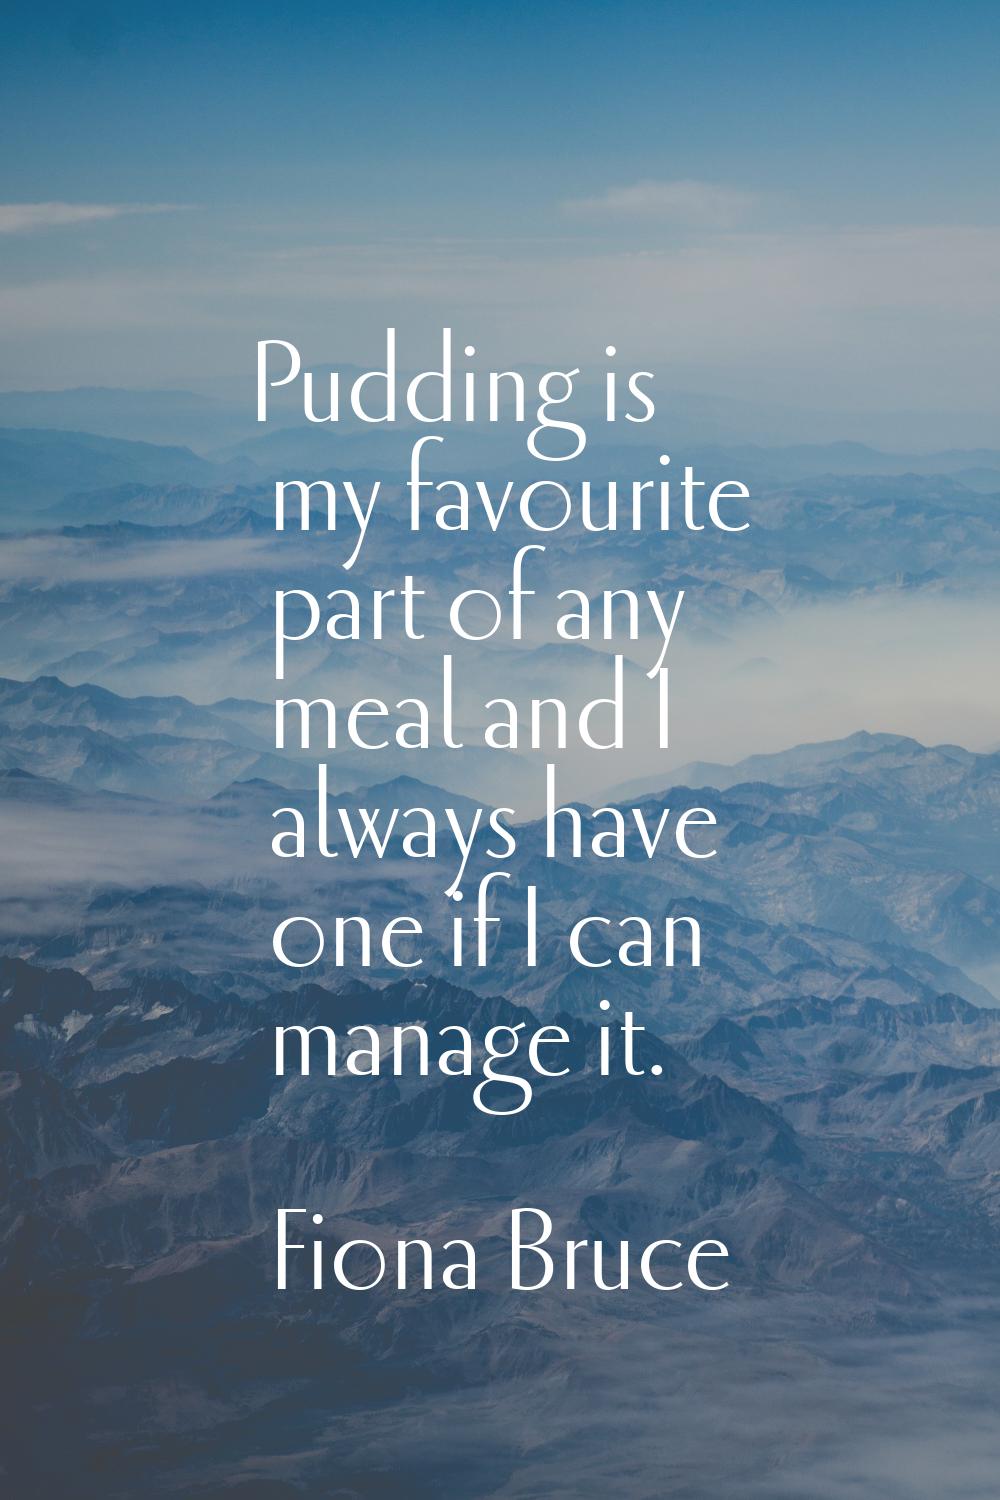 Pudding is my favourite part of any meal and I always have one if I can manage it.